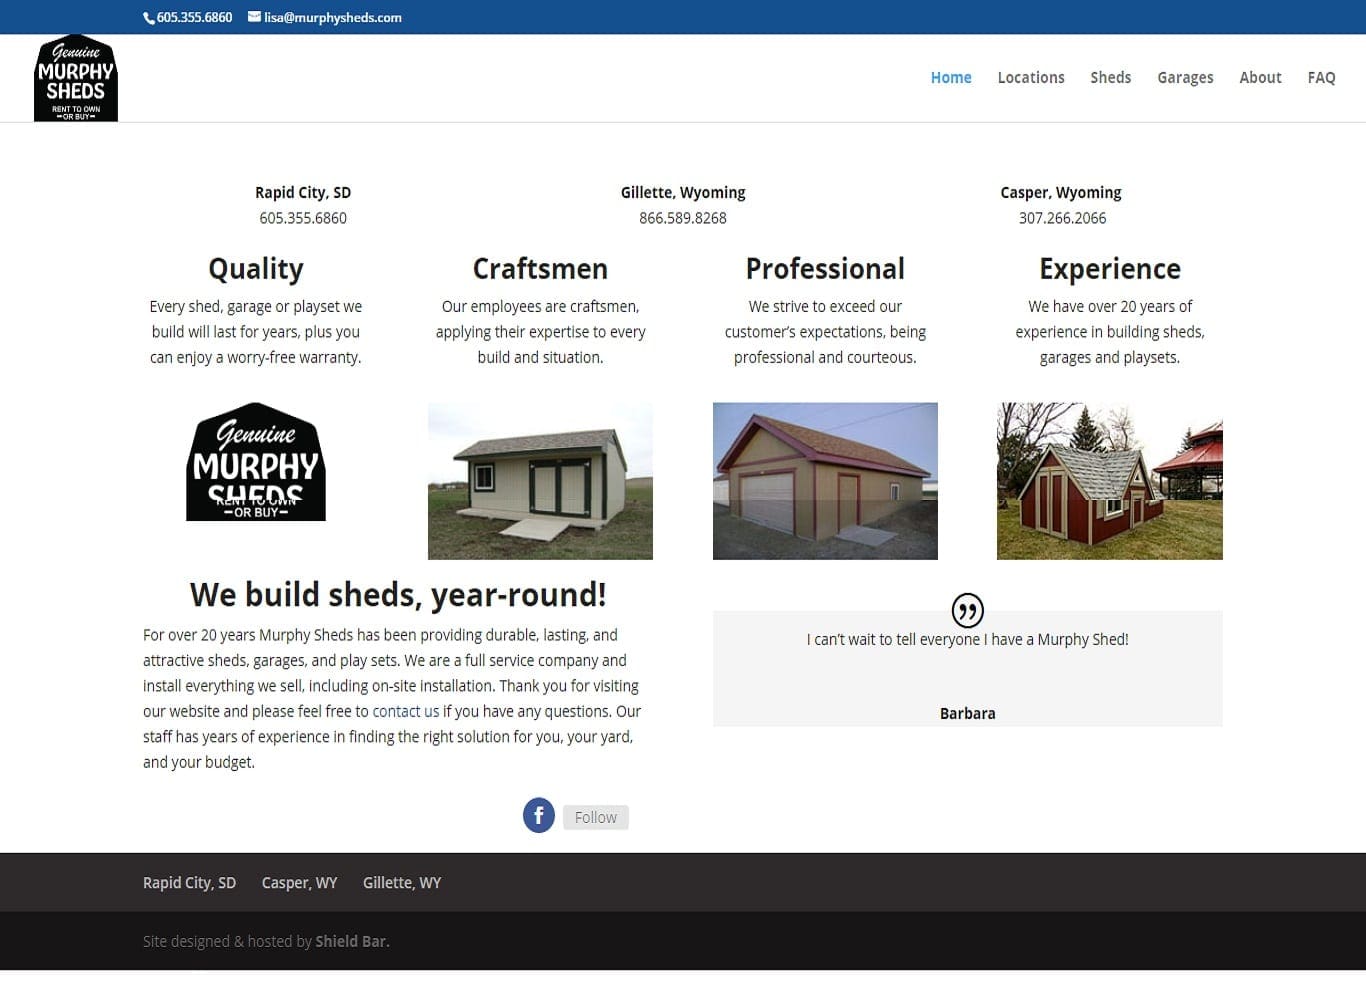 Experience the artistry of Murphy Sheds as Shield Bar Marketing creates a new website for the new owners, highlighting their quality sheds and amplifying customer testimonials, unveiling a digital platform that embodies their commitment to excellence.